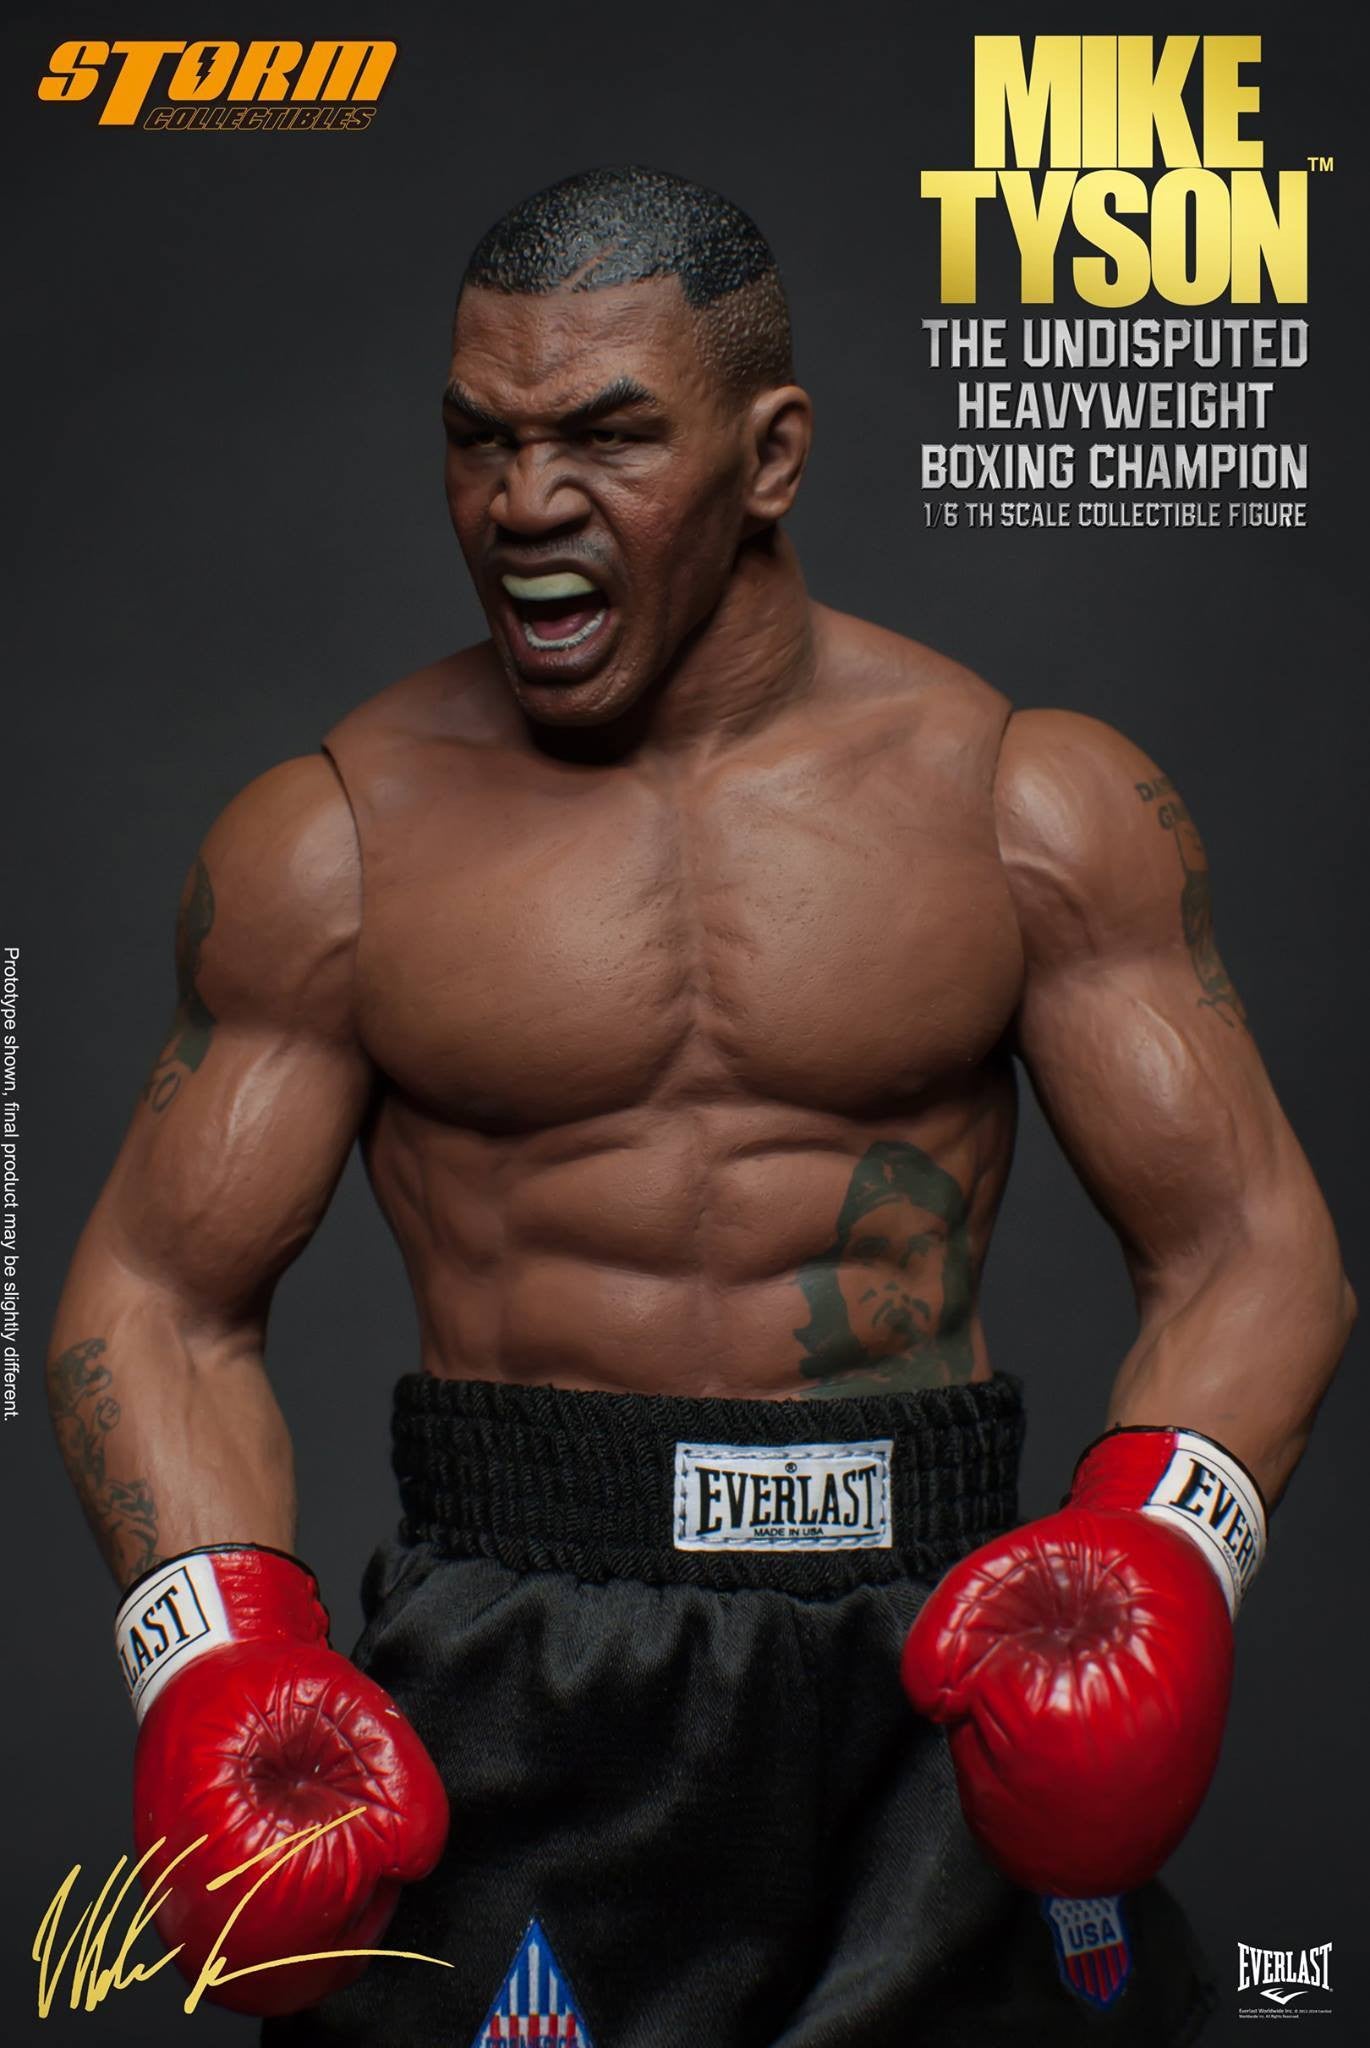 Storm Collectibles - 1:6 Scale Collectible Figure - Mike Tyson "The Undisputed Heavyweight Boxing Champion" - Marvelous Toys - 8